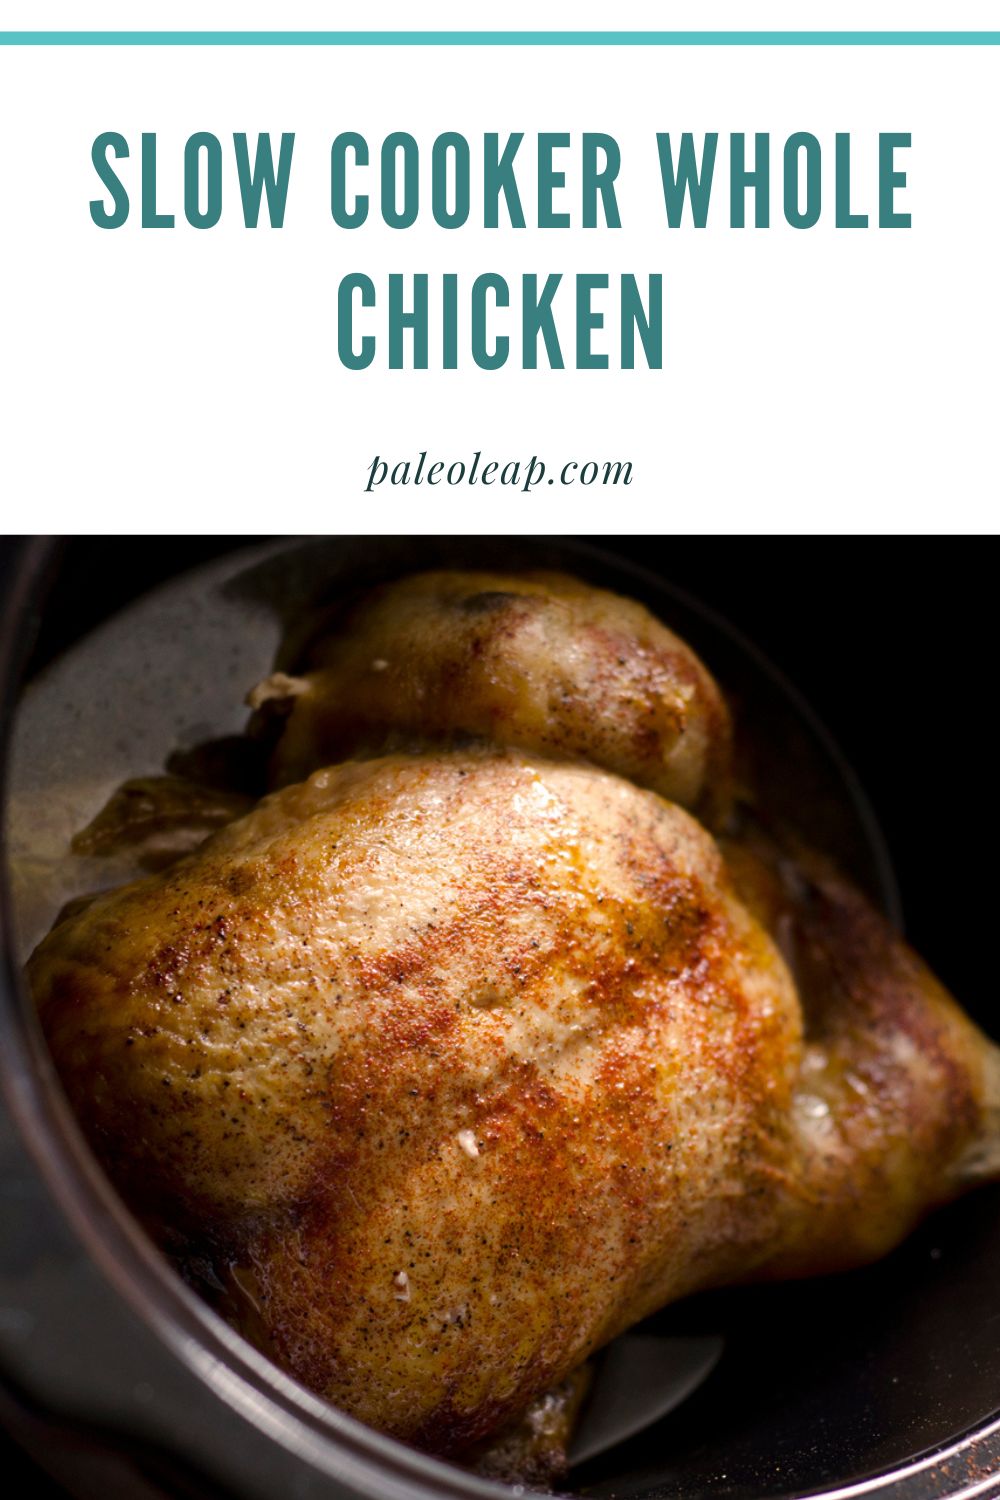 Slow Cooker Whole Chicken Recipe | Paleo Leap